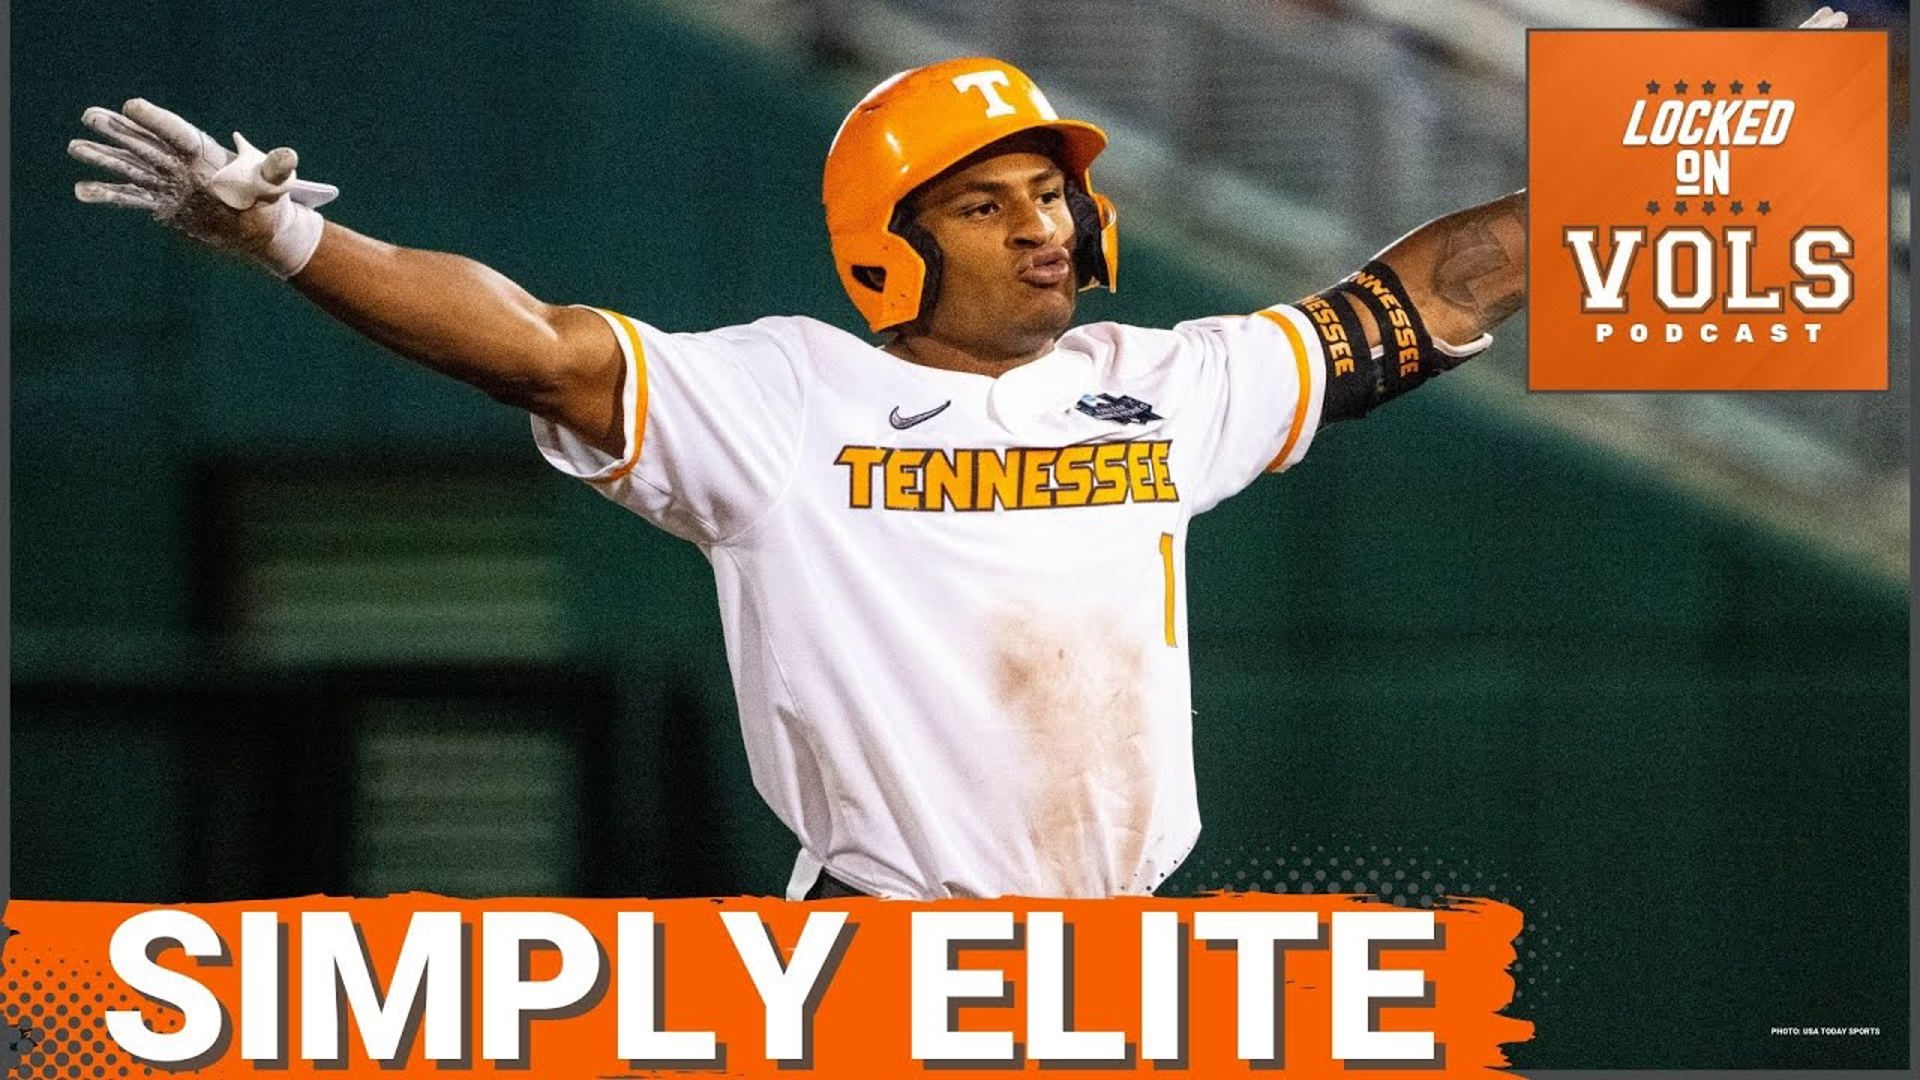 Better Tennessee Performance? Jalin Hyatt v. Alabama or Christian Moore in the College World Series